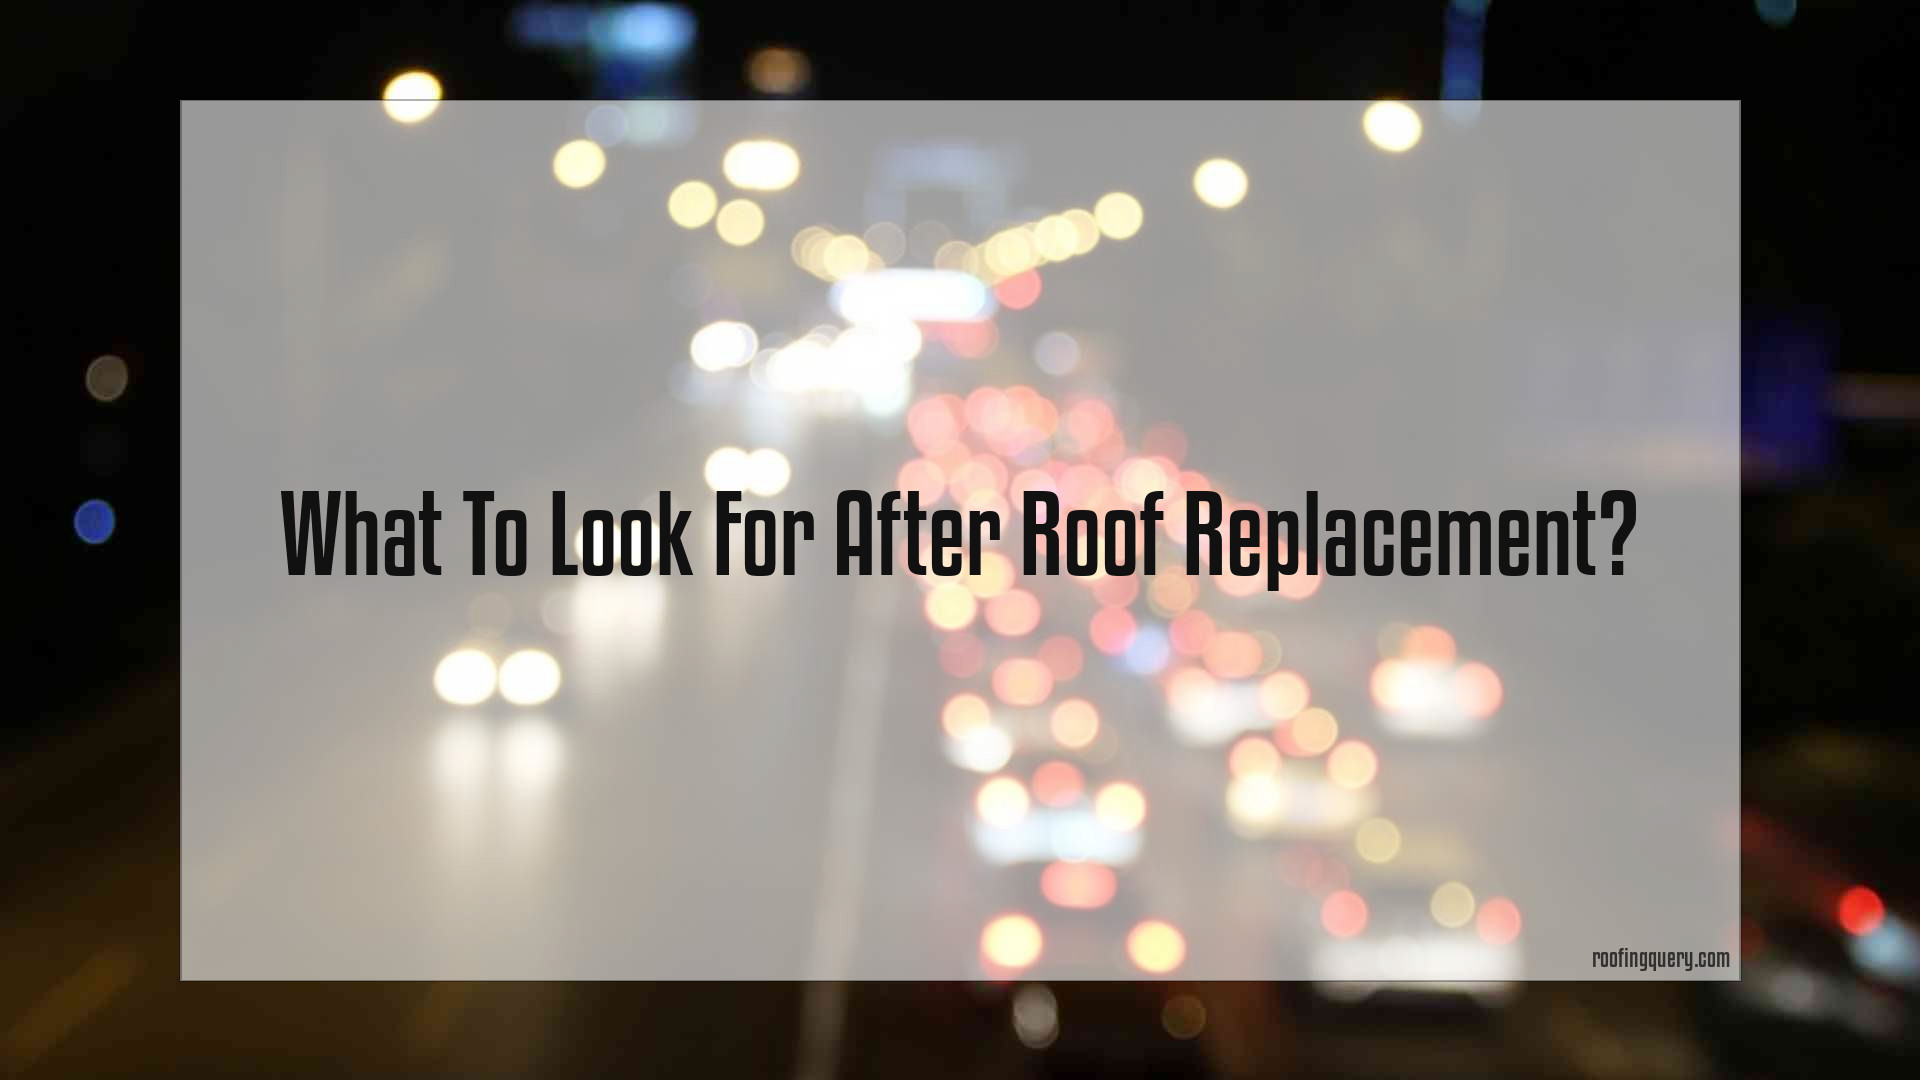 What To Look For After Roof Replacement